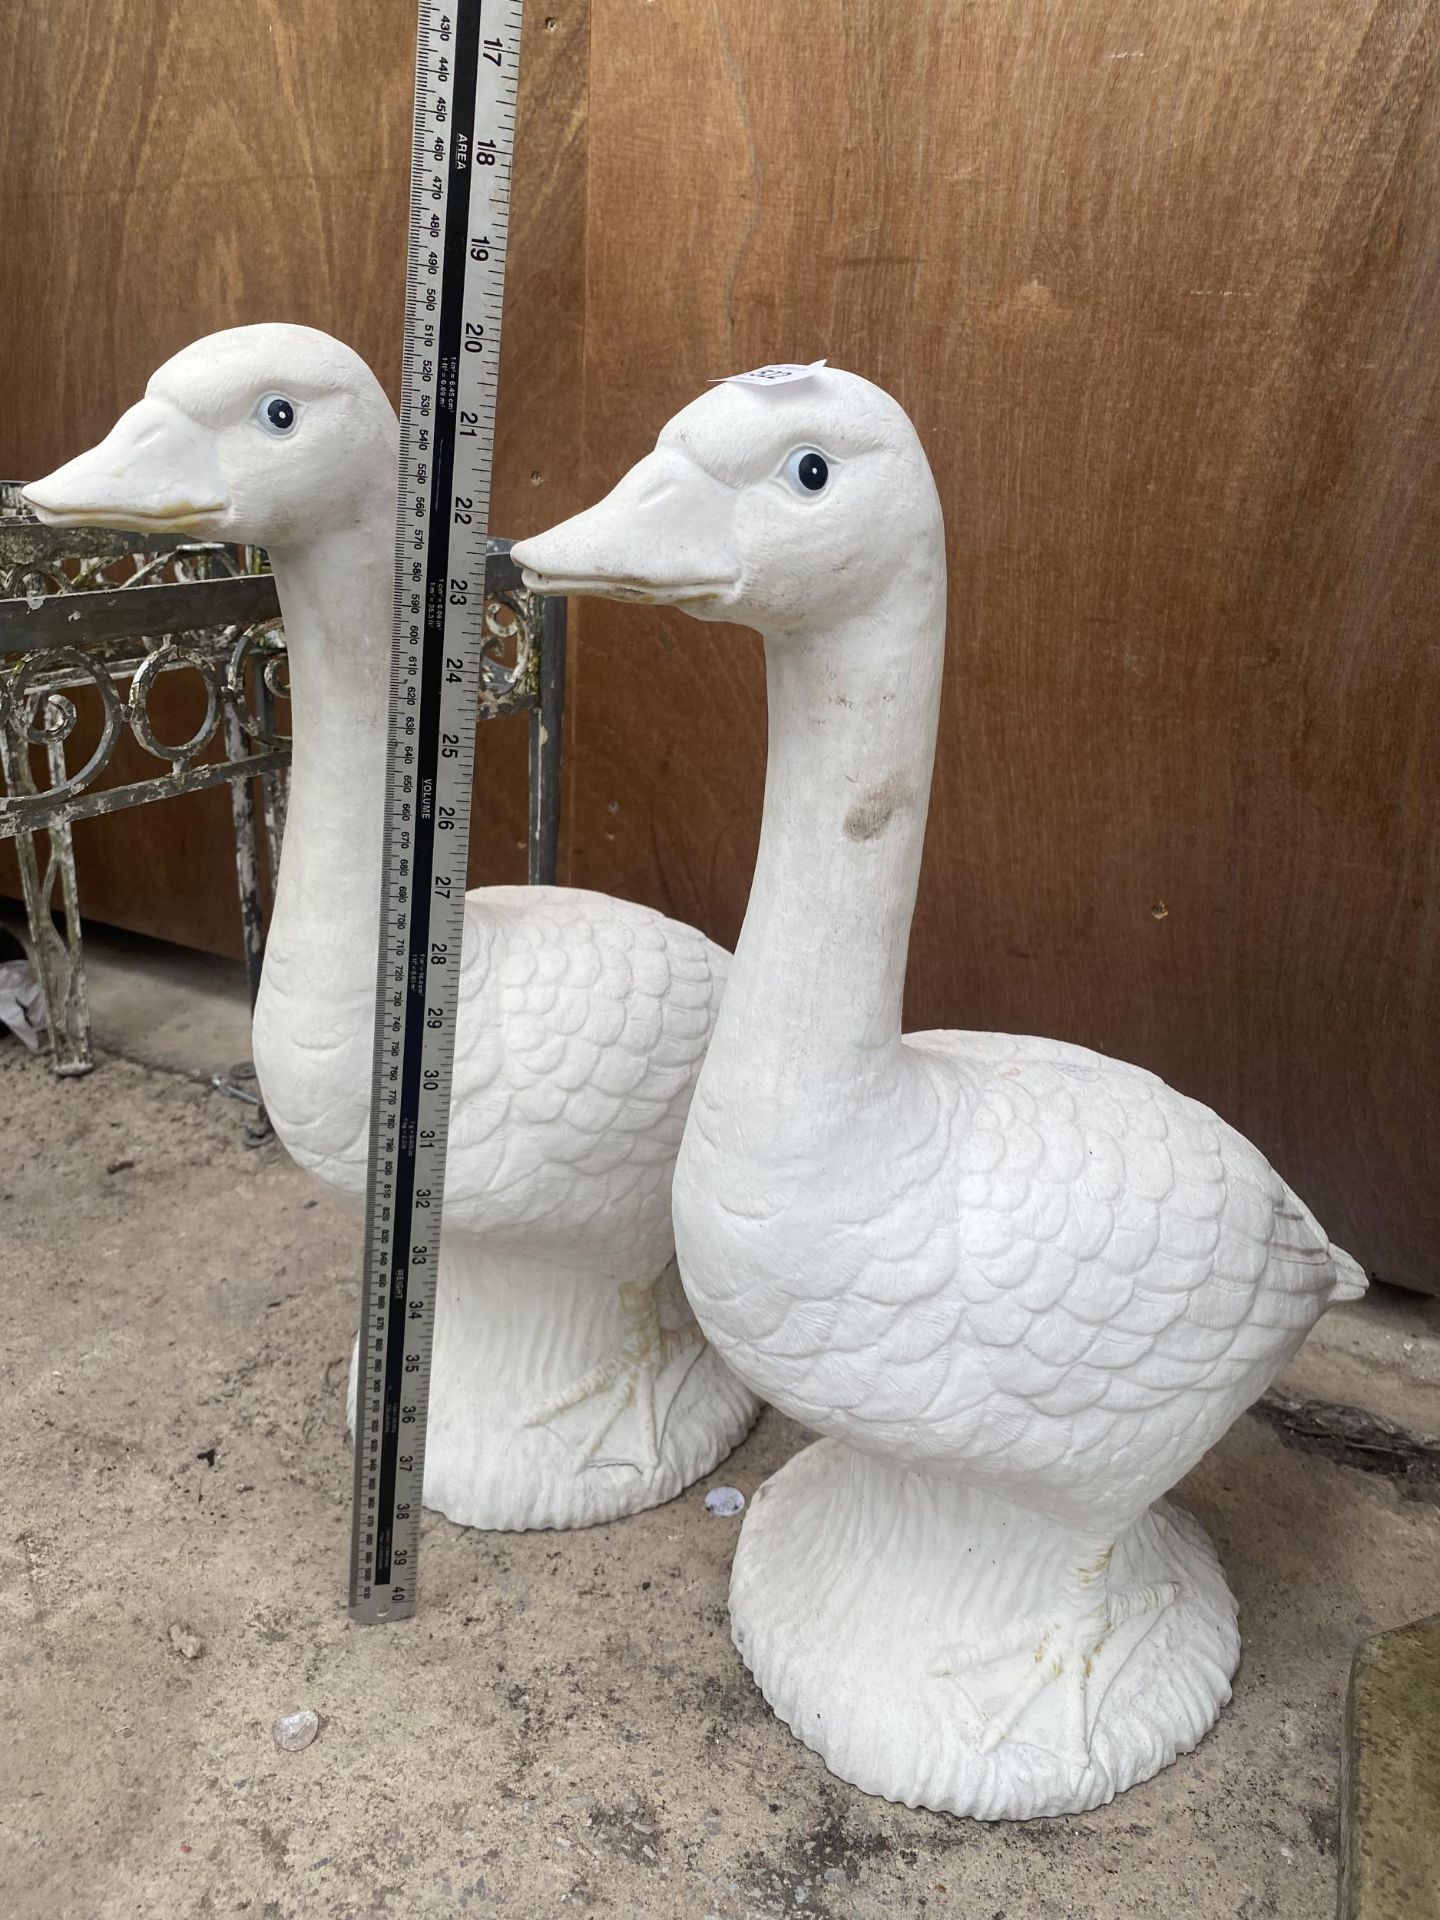 A PAIR OF CONCERETE FILLED PLASTIC DUCKS - Image 2 of 2